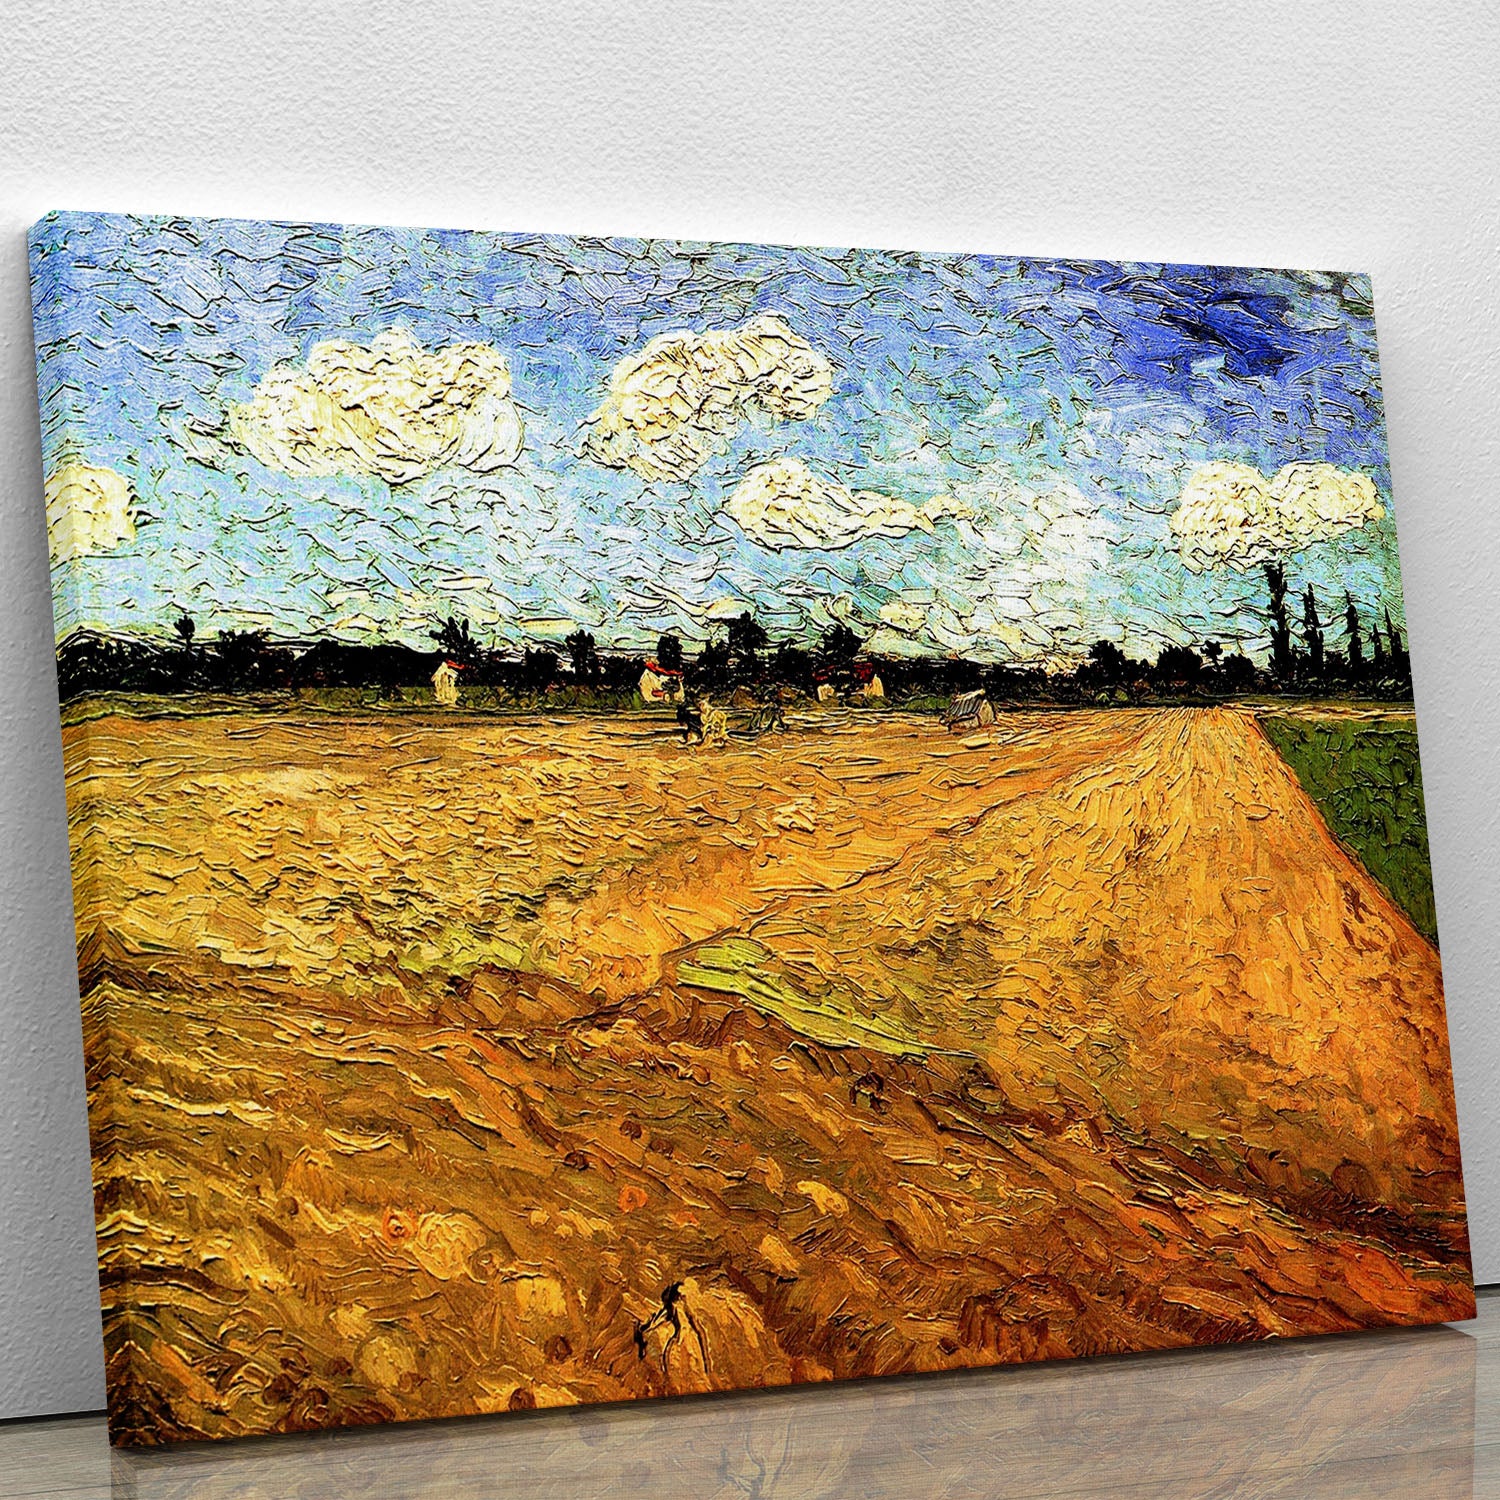 Ploughed Field by Van Gogh Canvas Print or Poster - Canvas Art Rocks - 1